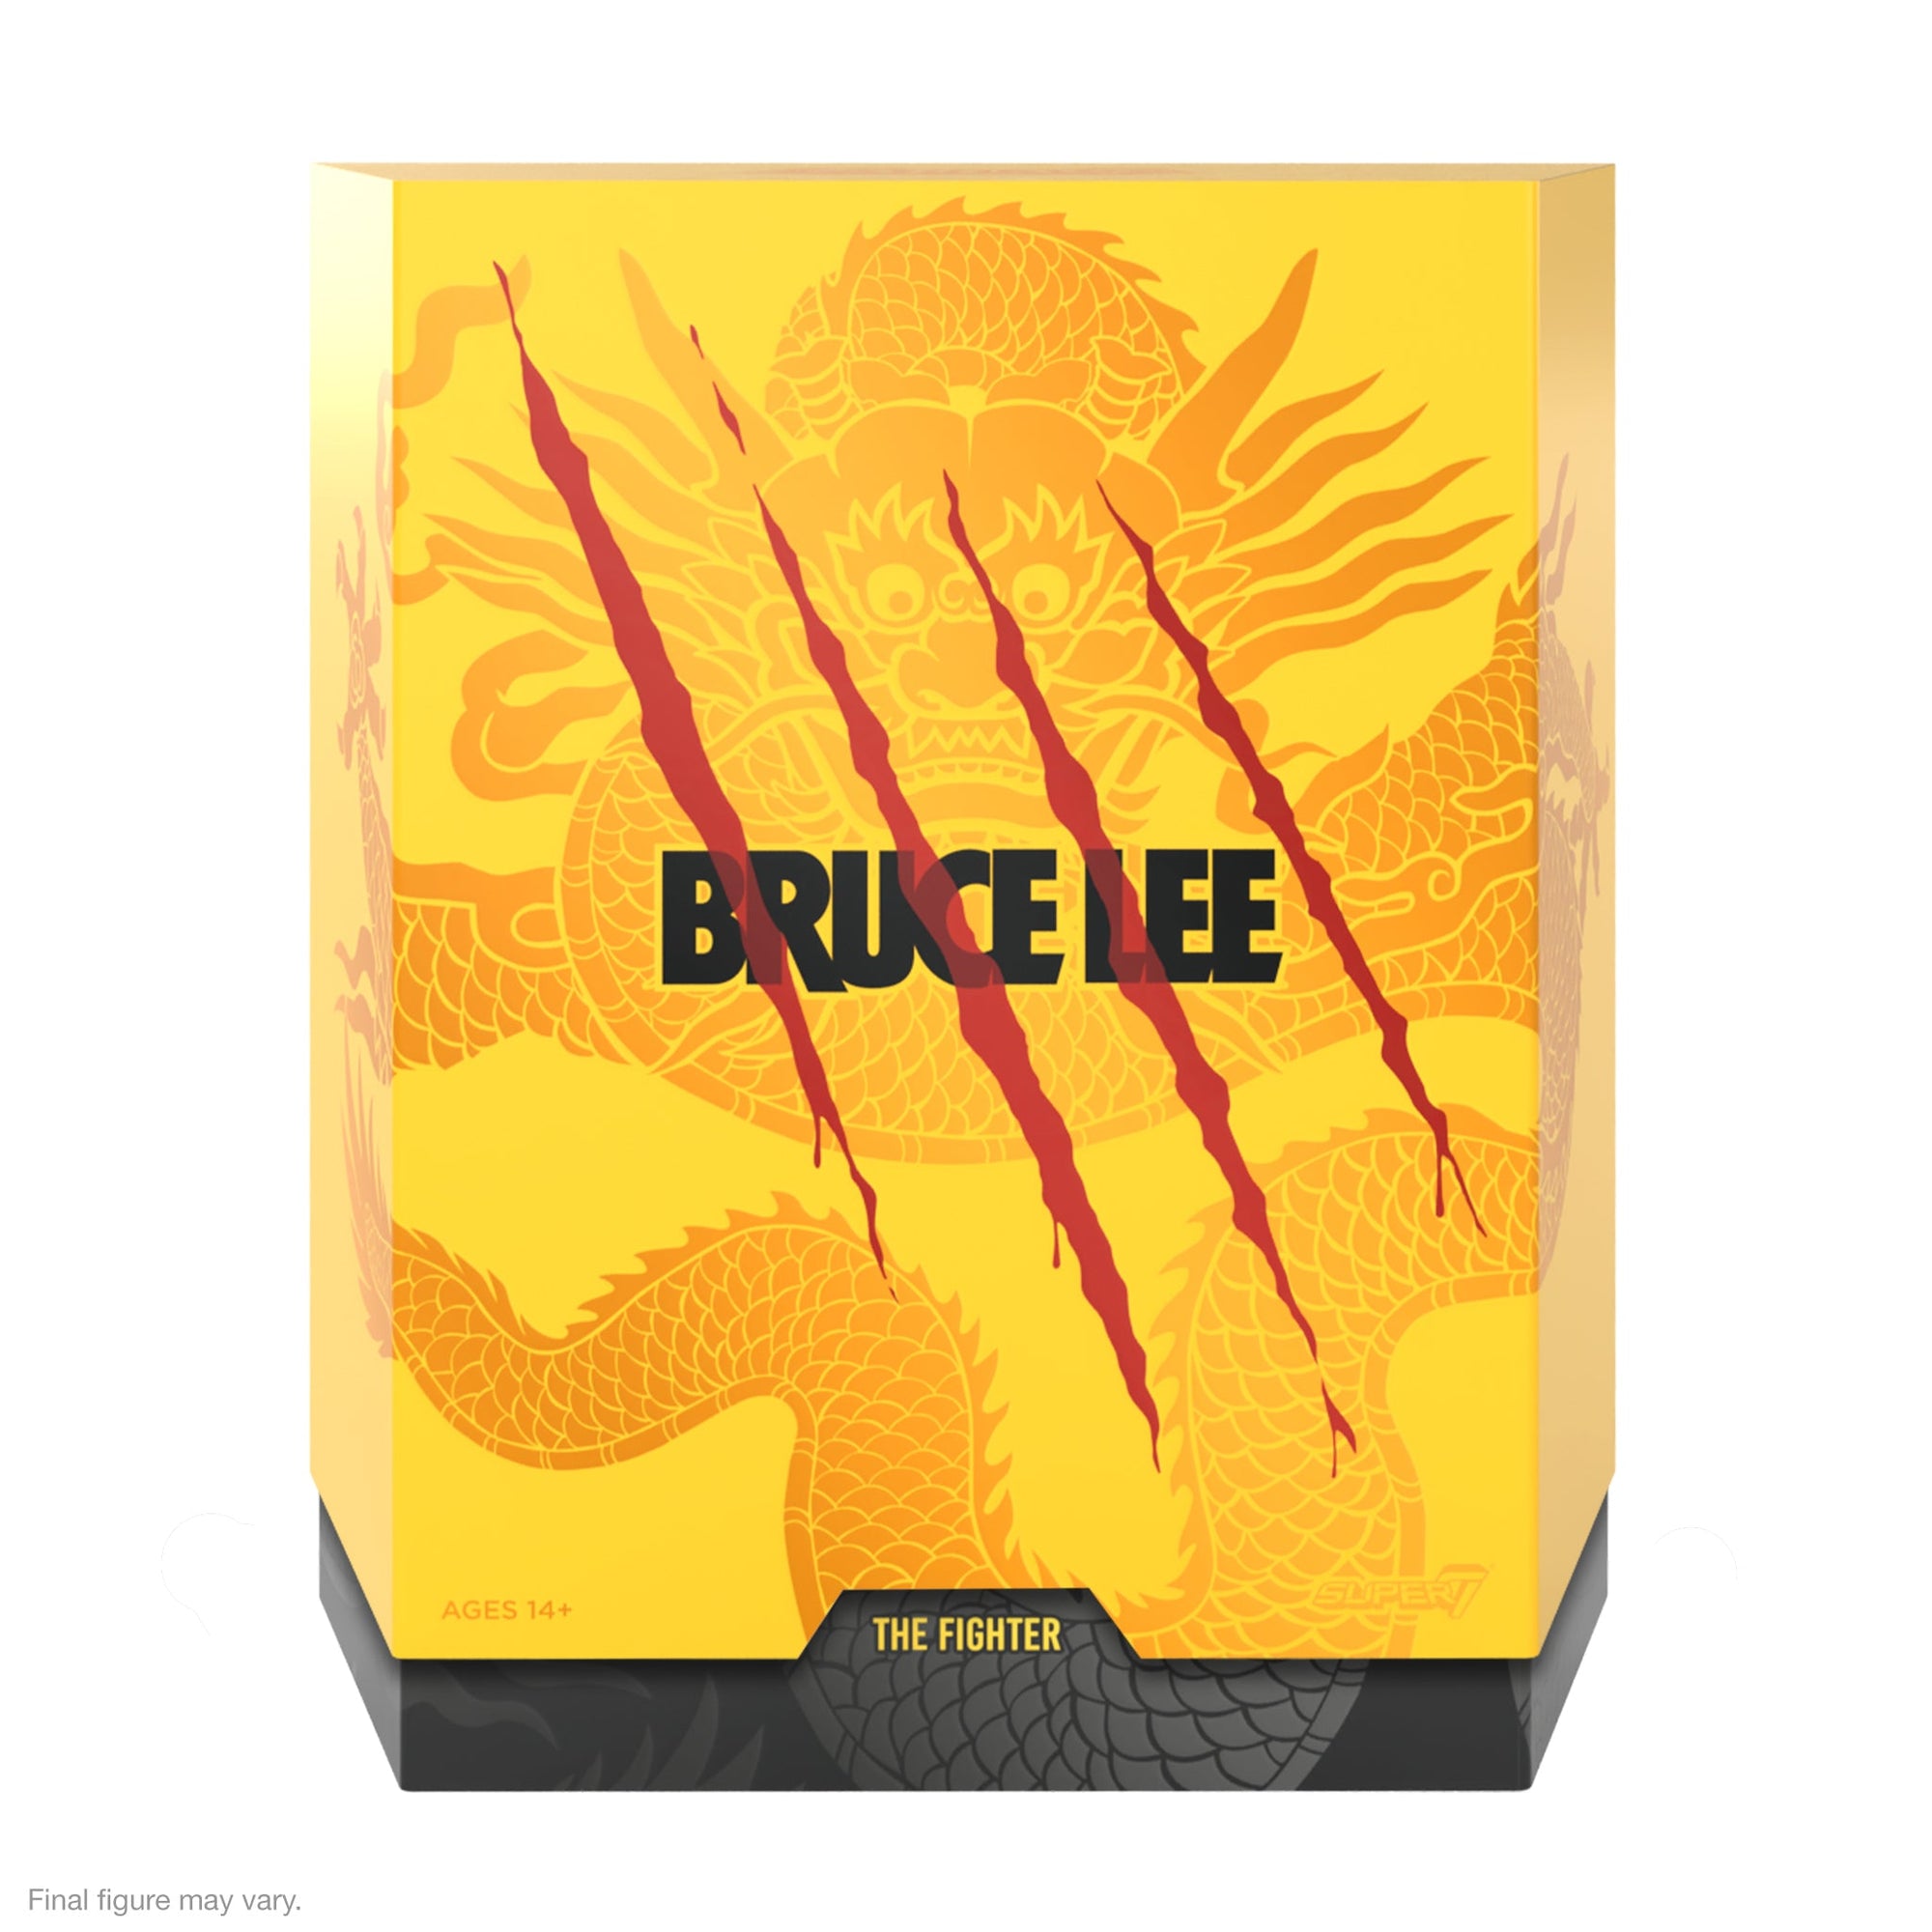 Bruce Lee (The Fighter) - Ultimates! Figure by Super7